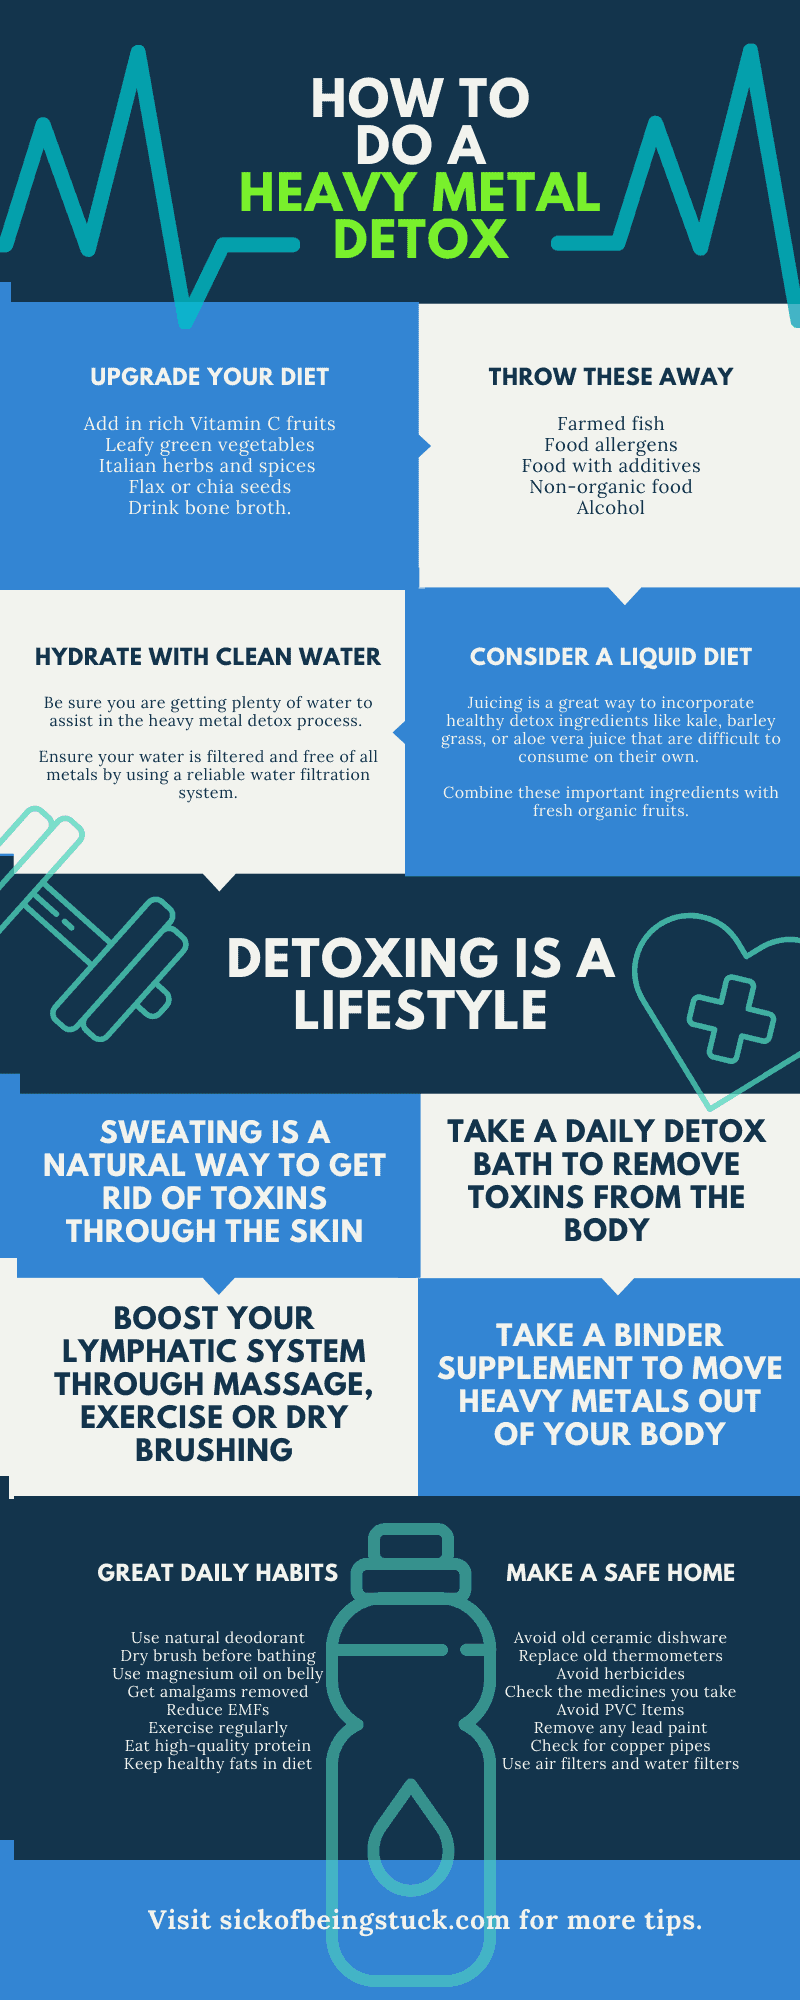 Follow these steps to perform a heavy metal detox!